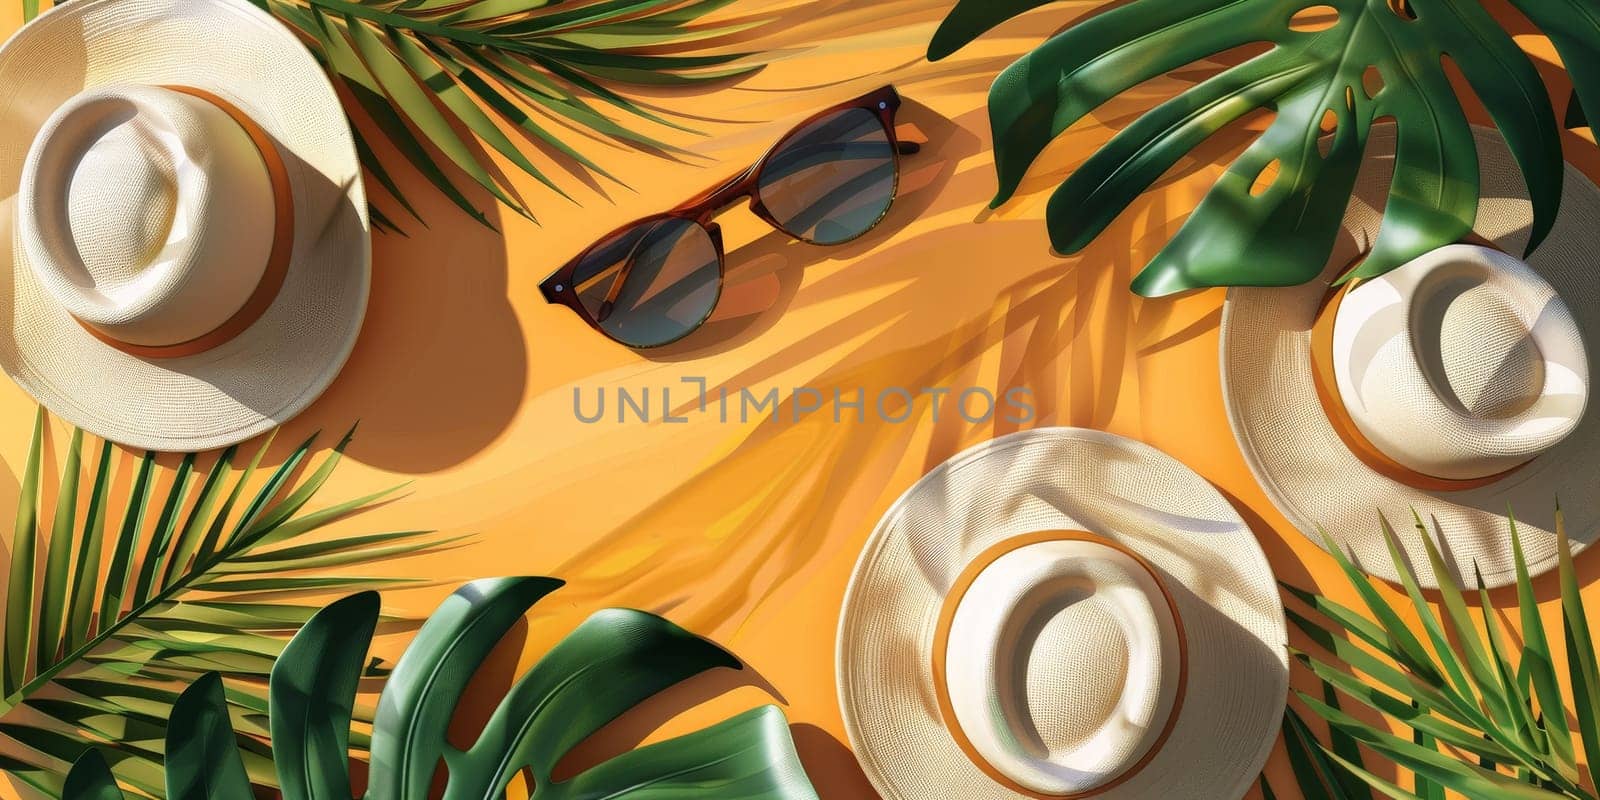 A tropical scene with hats, sunglasses, and palm trees by nateemee